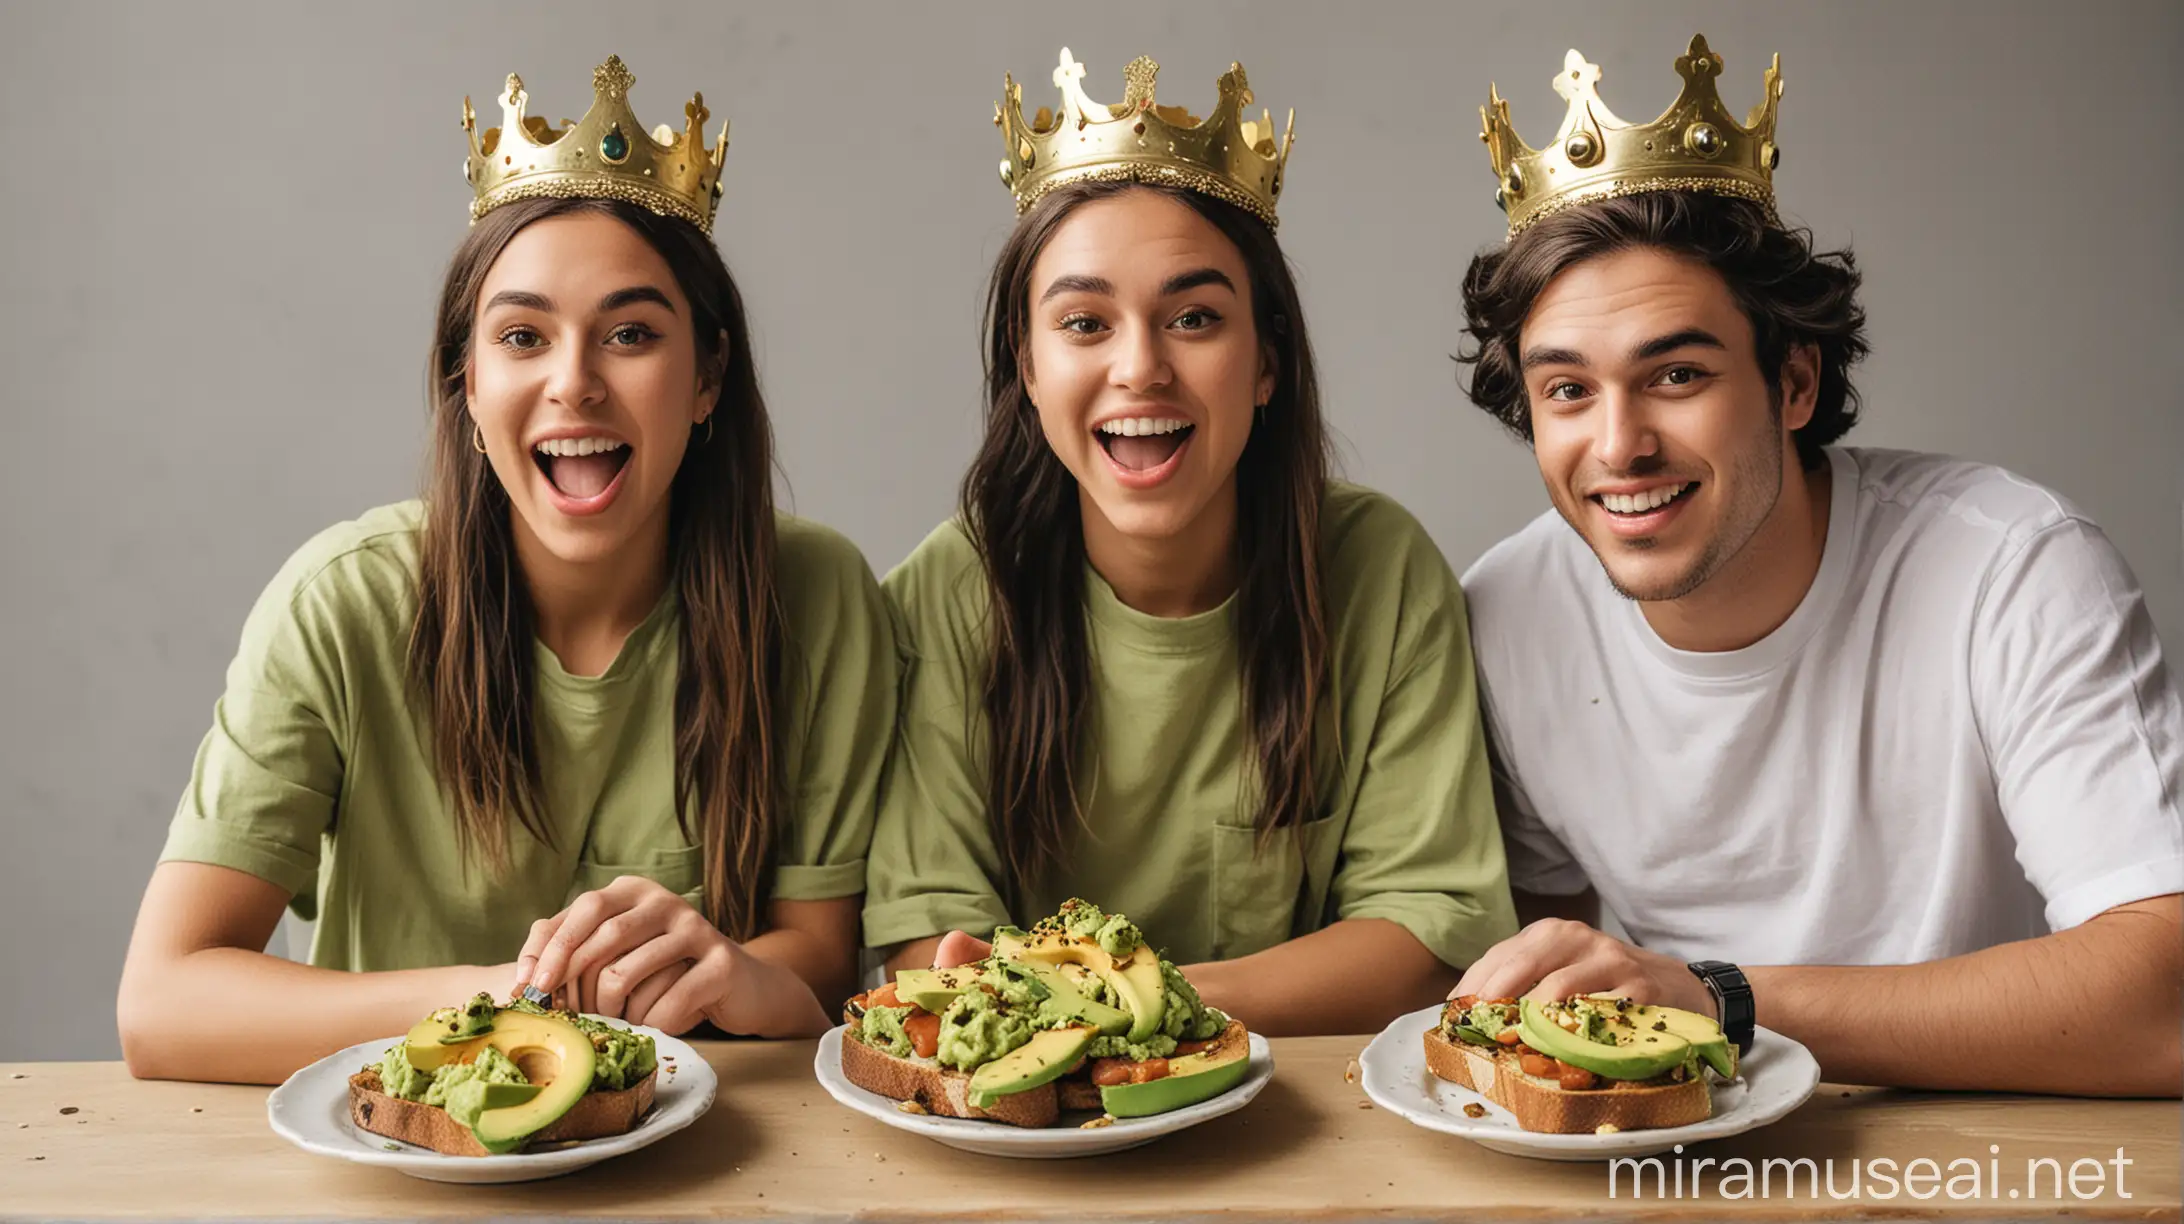 A millennial king who is a man and a millennial queen who is a woman, and they are eating avocado toast and wearing crowns

